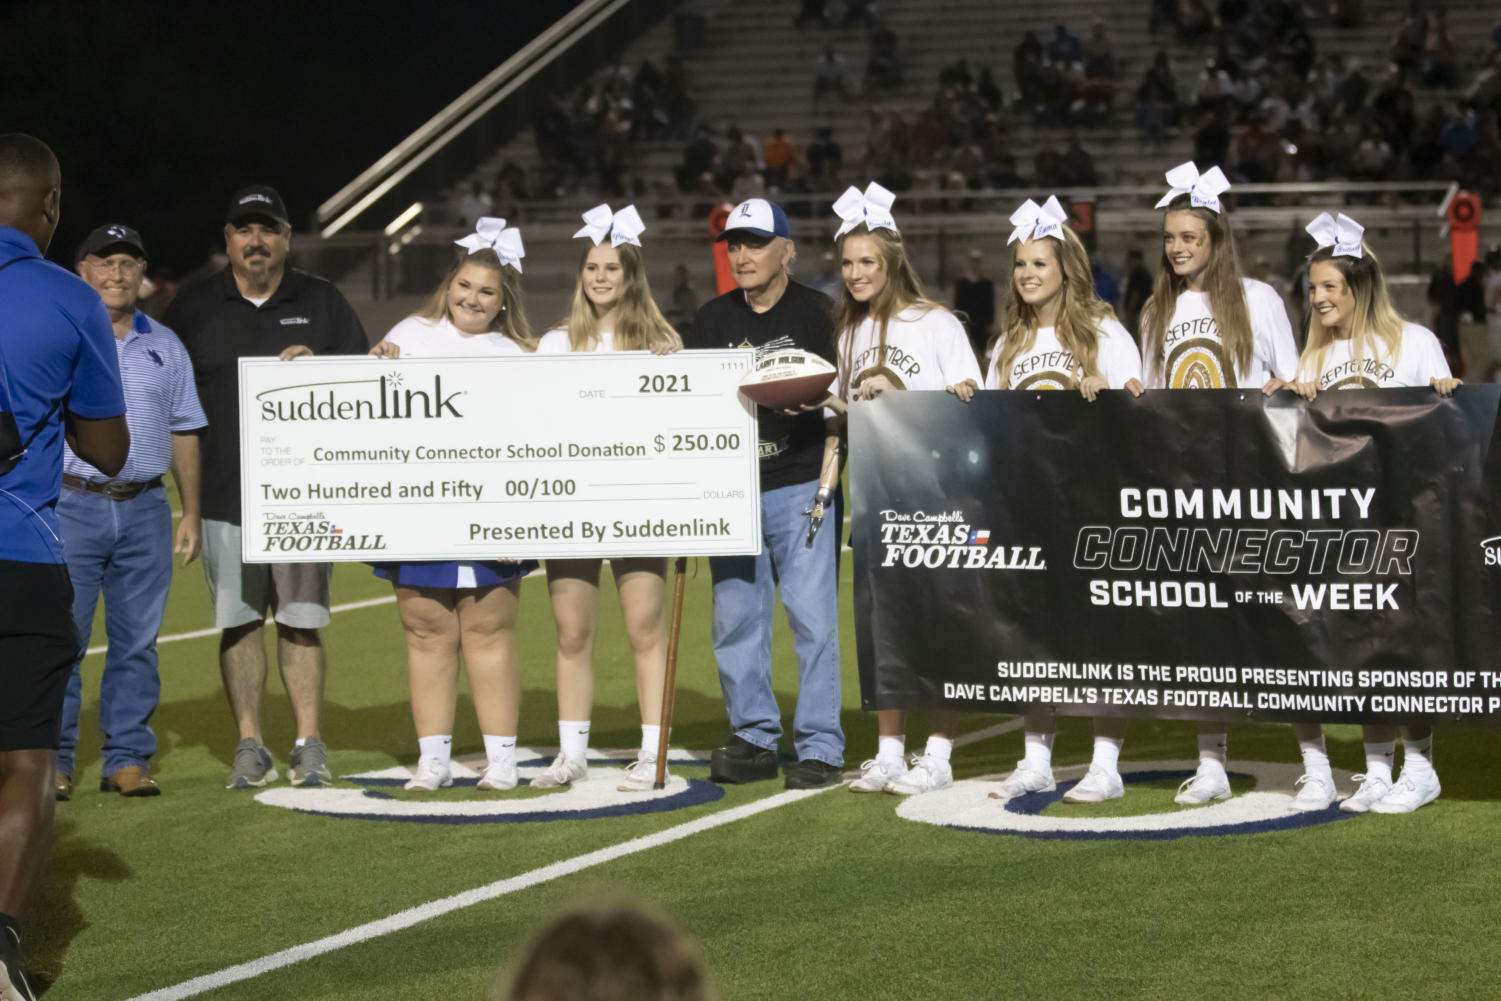 Community leader Larry Wilson poses with the cheerleaders as he accepts his award. Wilson received his award after first quarter during the football game on Sept. 17.